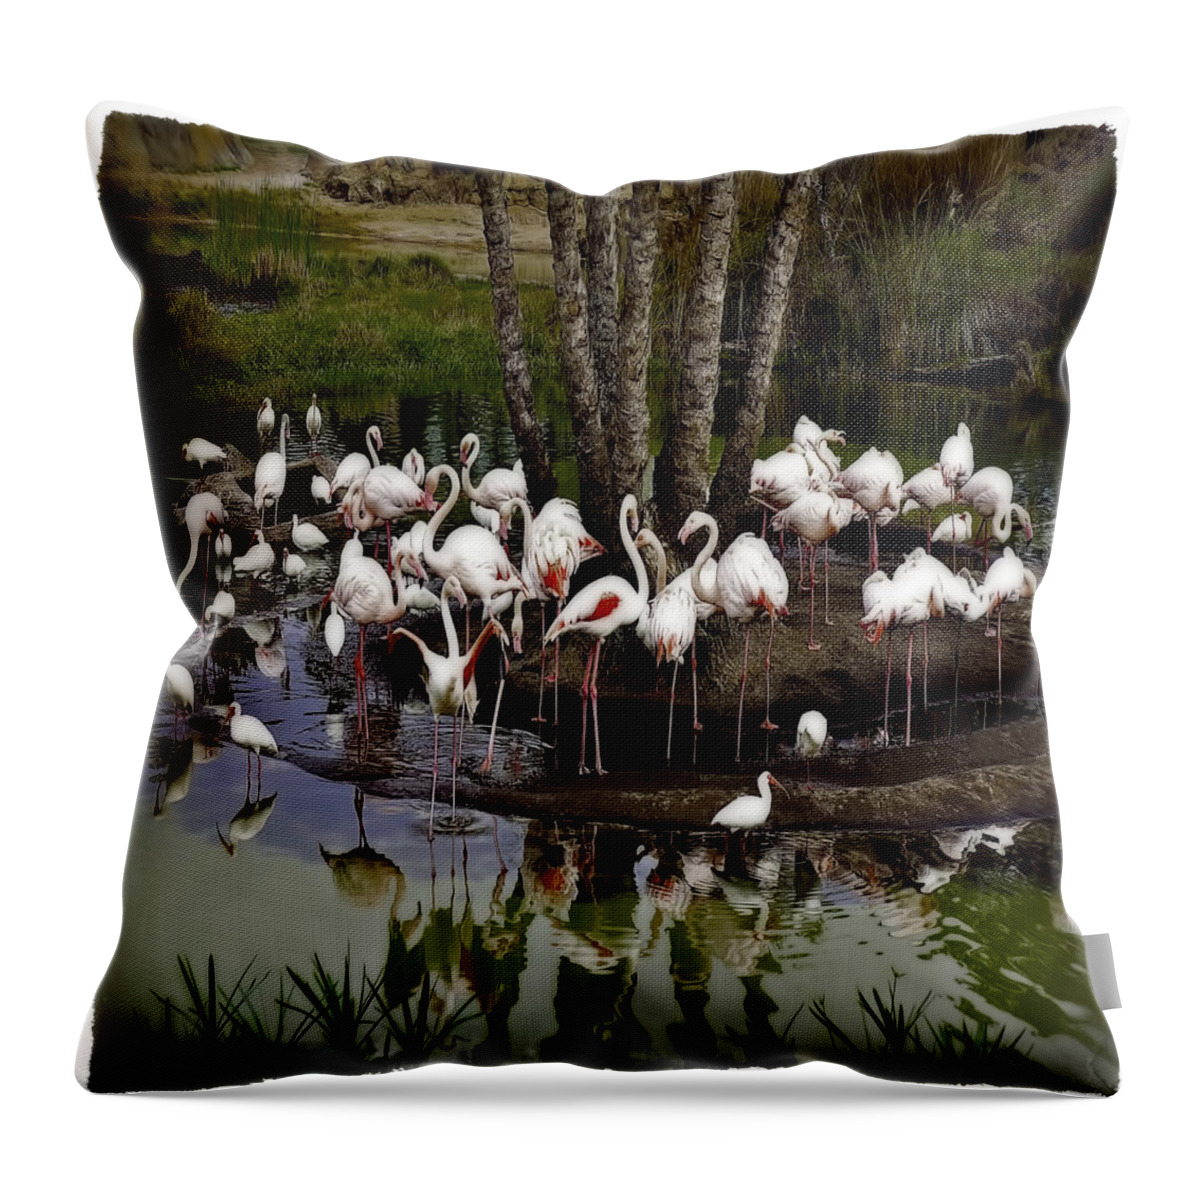  Throw Pillow featuring the photograph Gathering by Jerry Golab